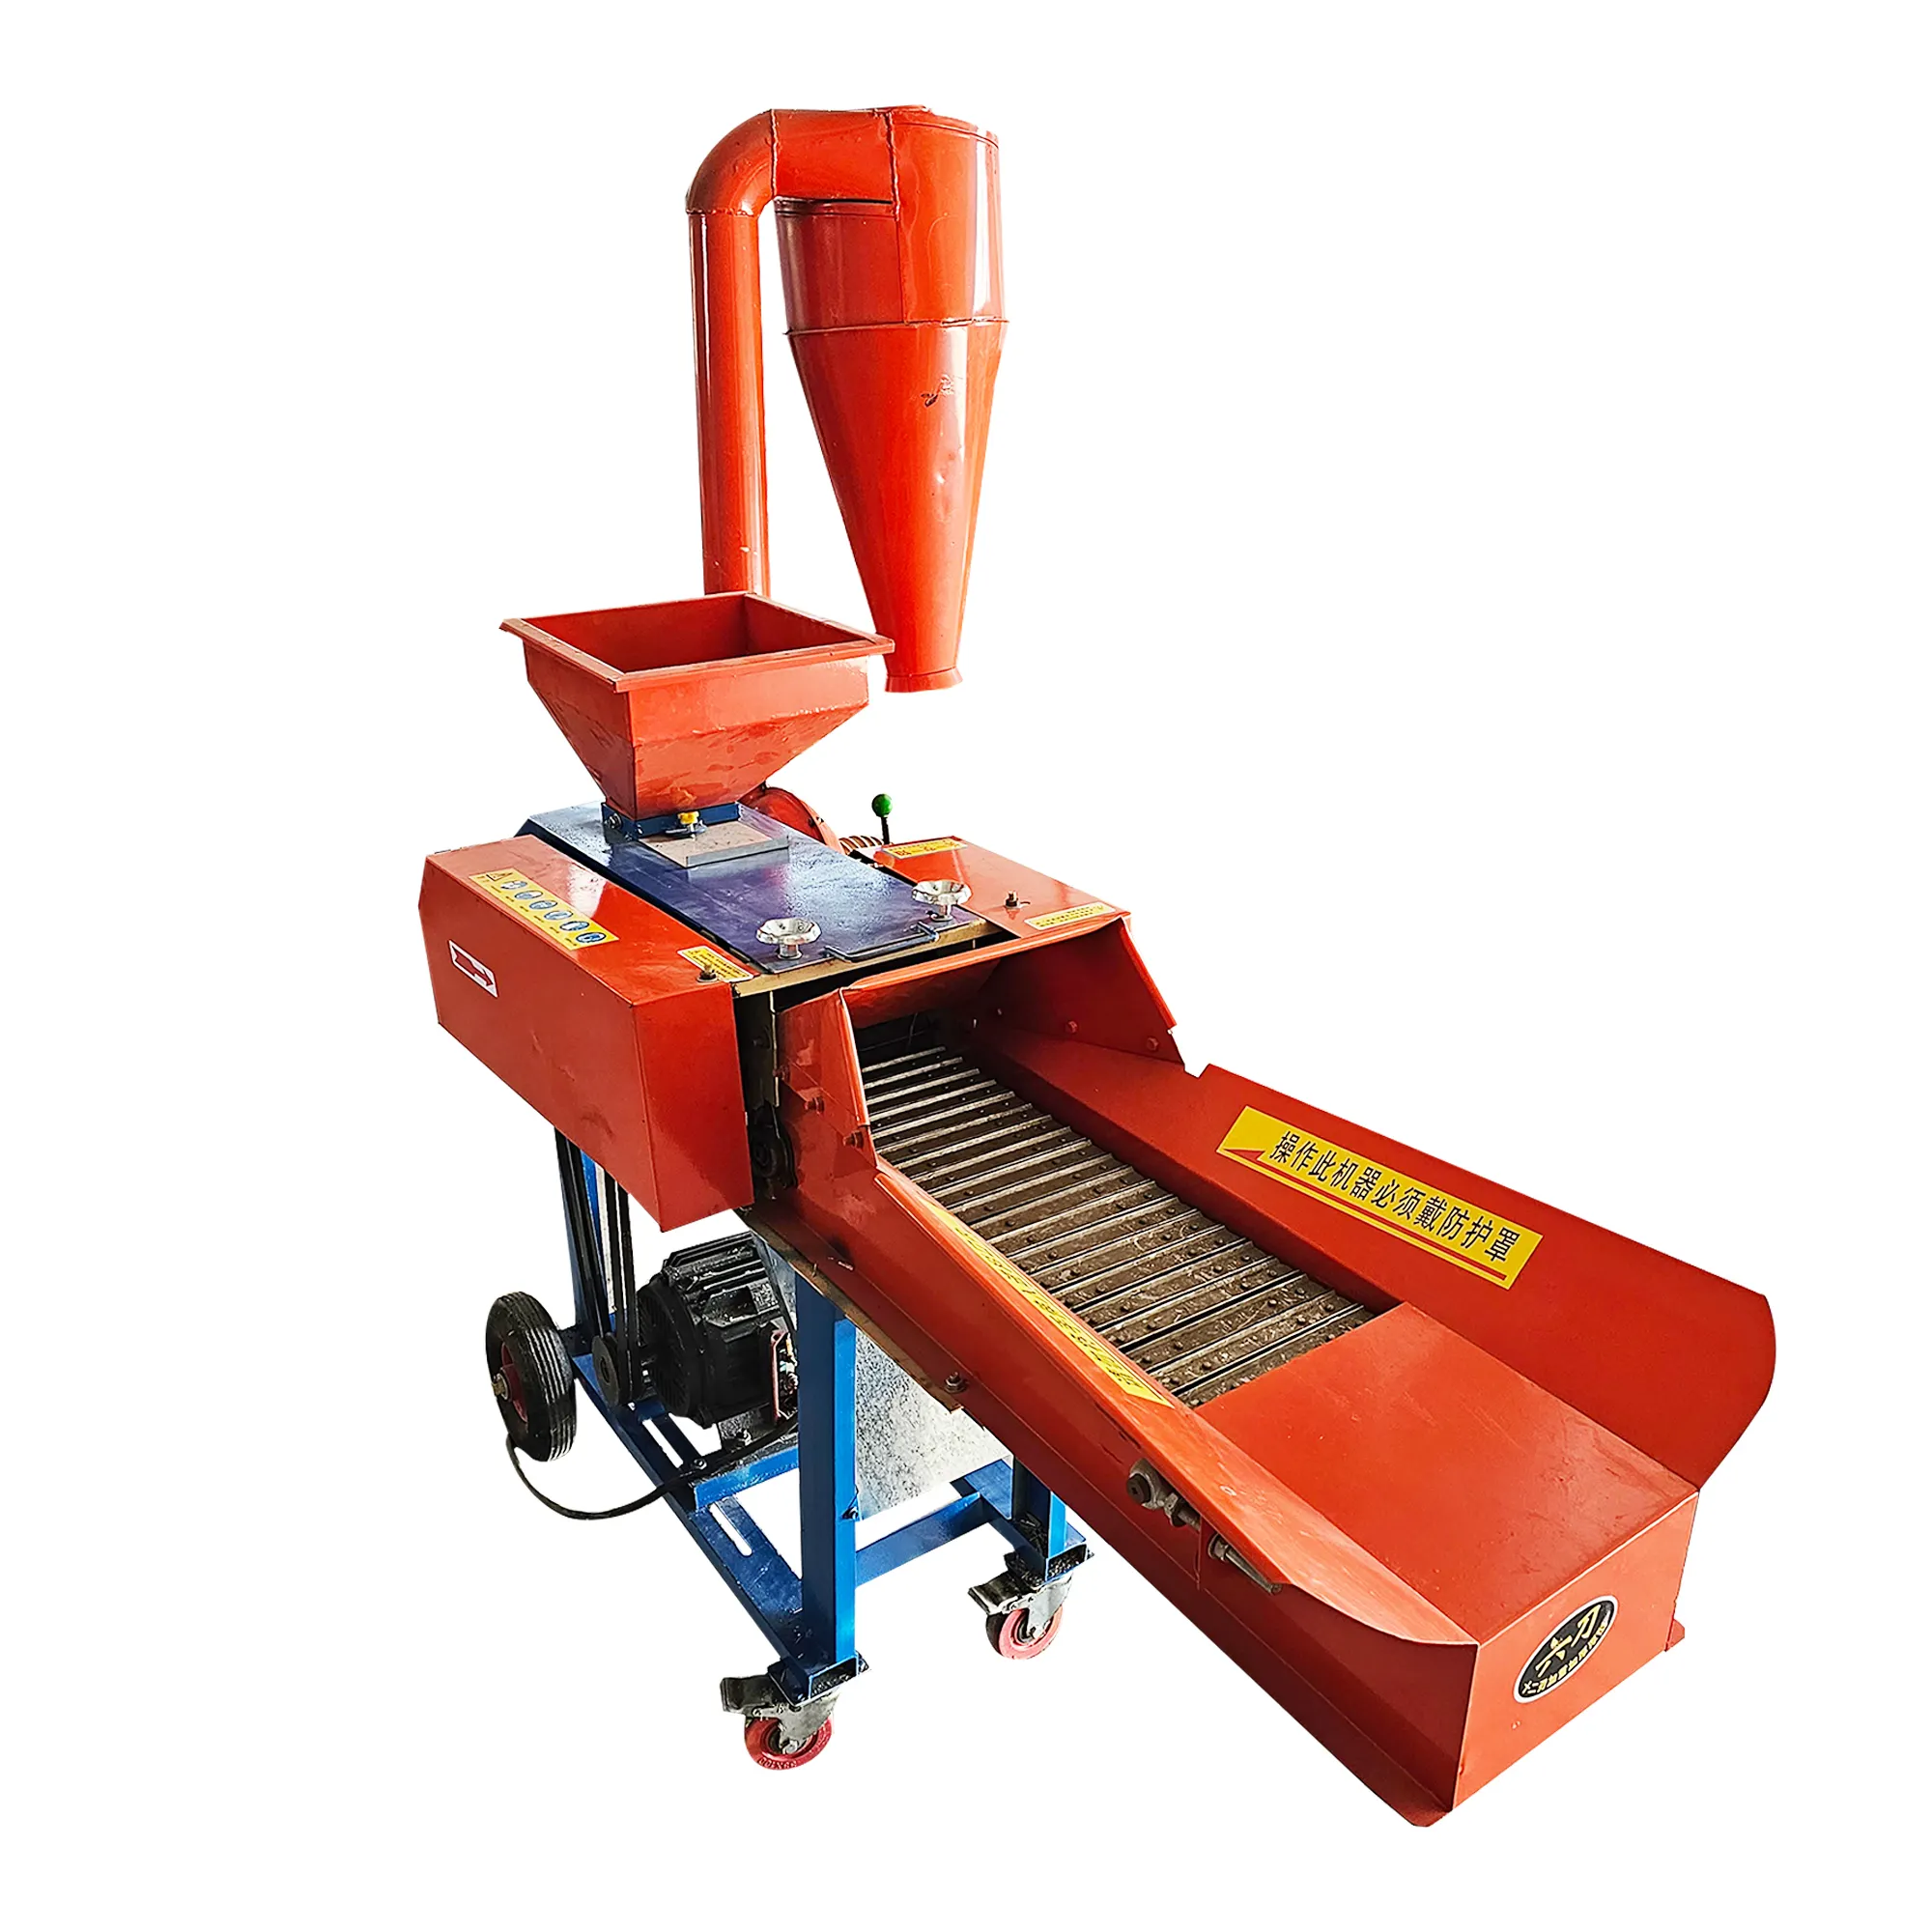 Factory Sales Cutting Grass Kneading Machine 2.5-6.8 T Automatic Feeding Corn Straw Cutting Kneading for Sheep Cattle